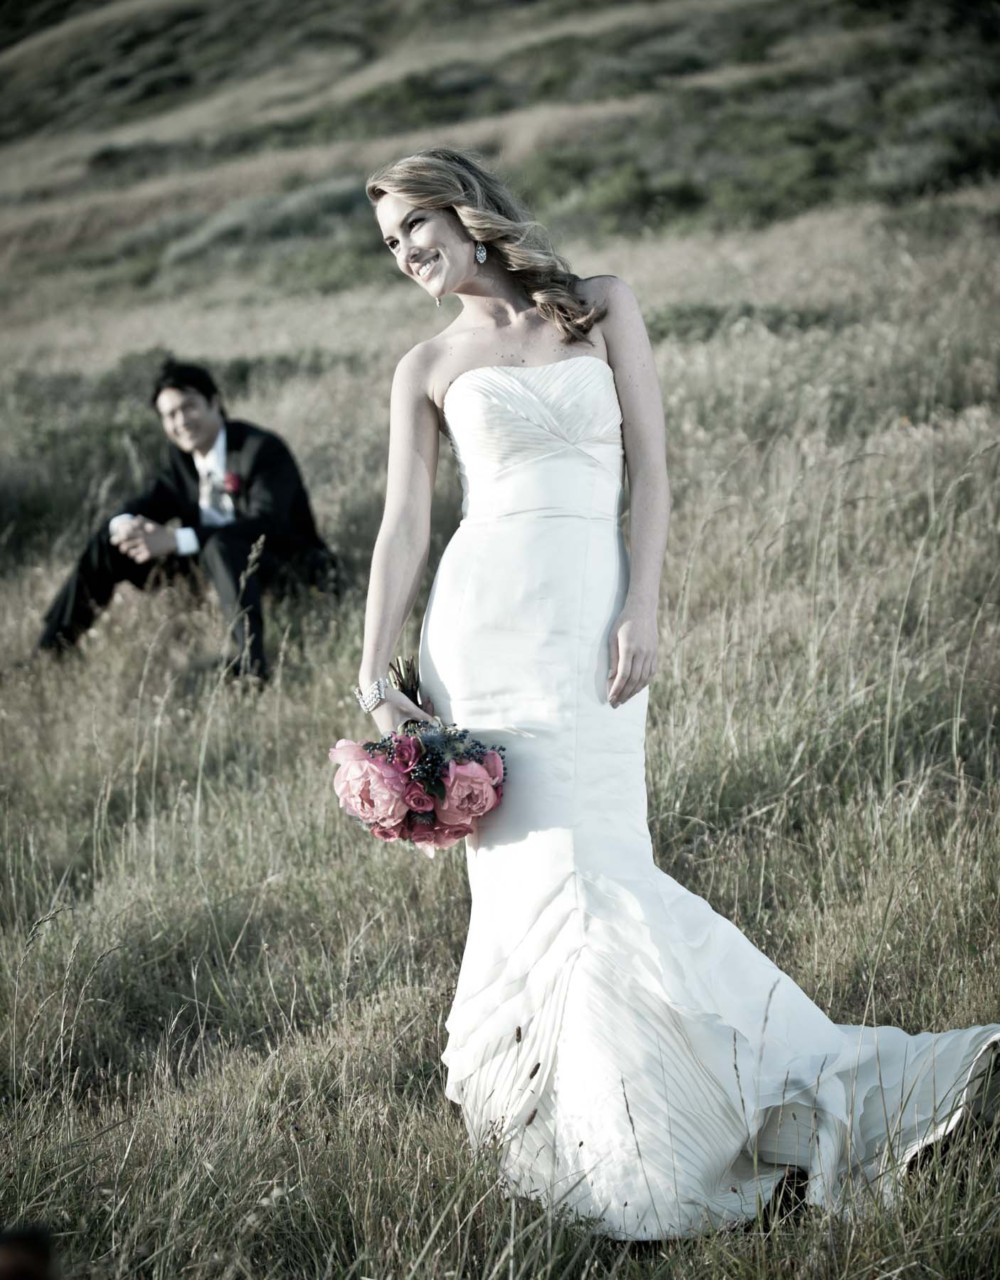 Looking for a destination wedding photographer in Eagle River?